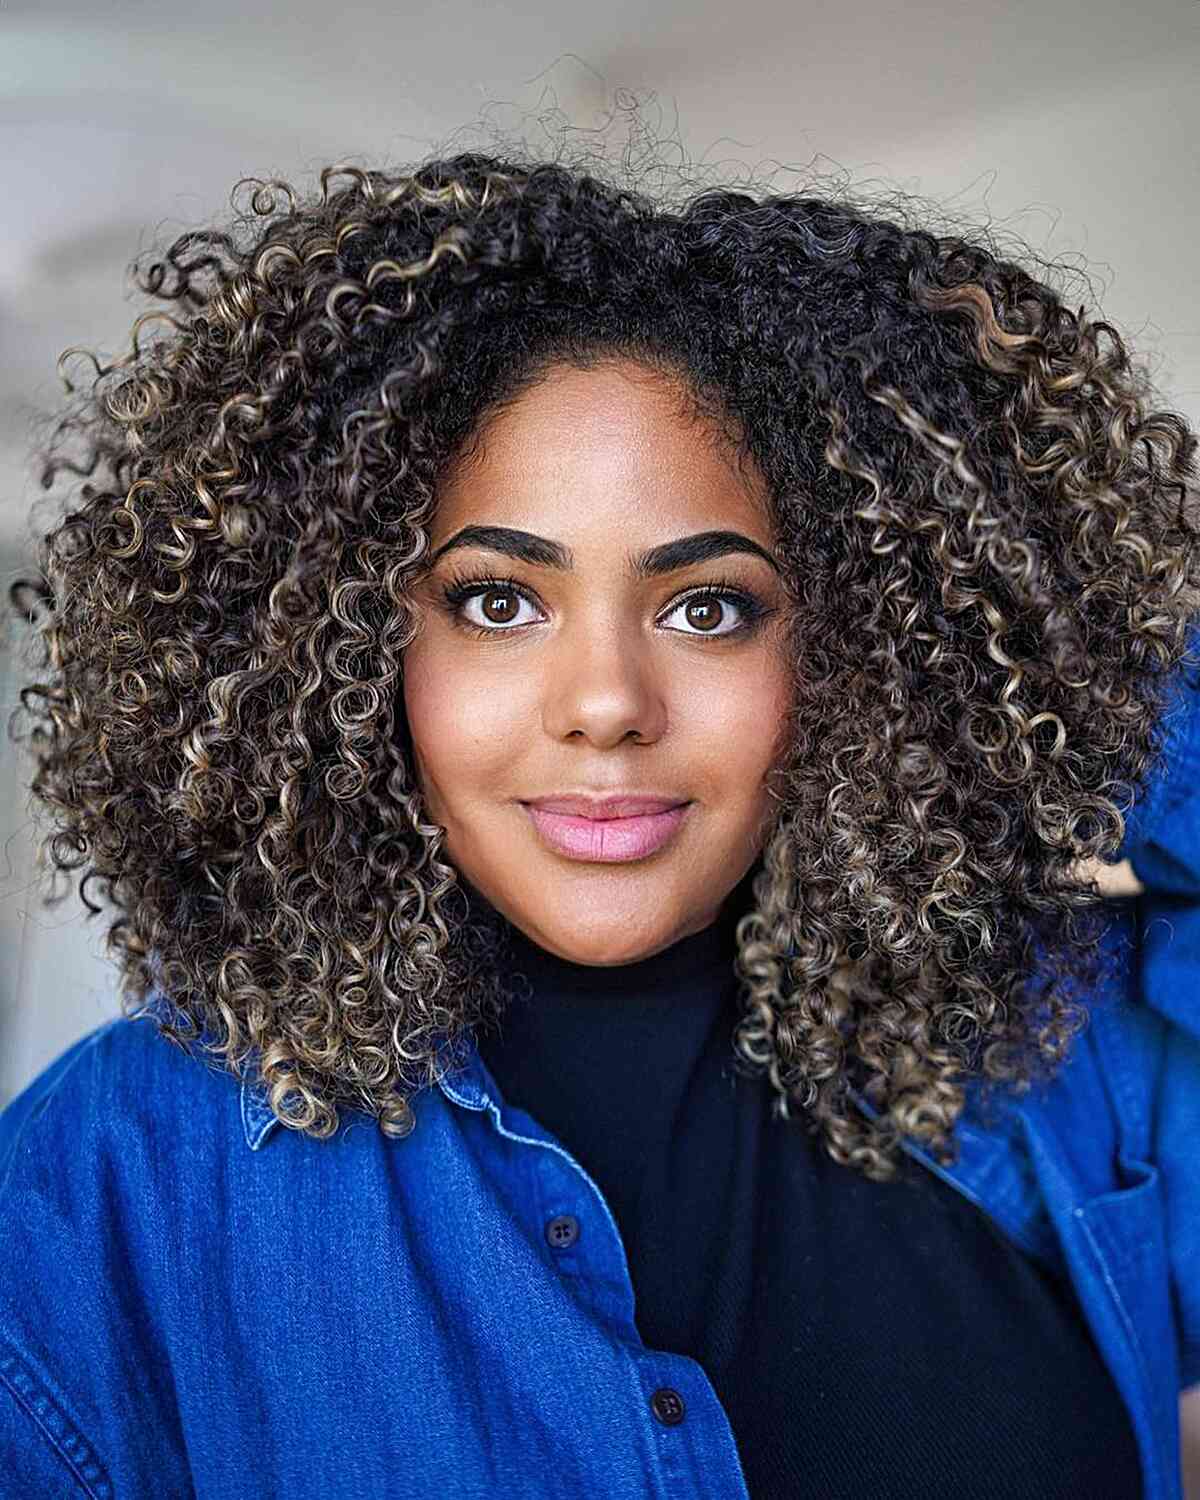 Curve Designed Curly Hair for African American Women with thick natural curls